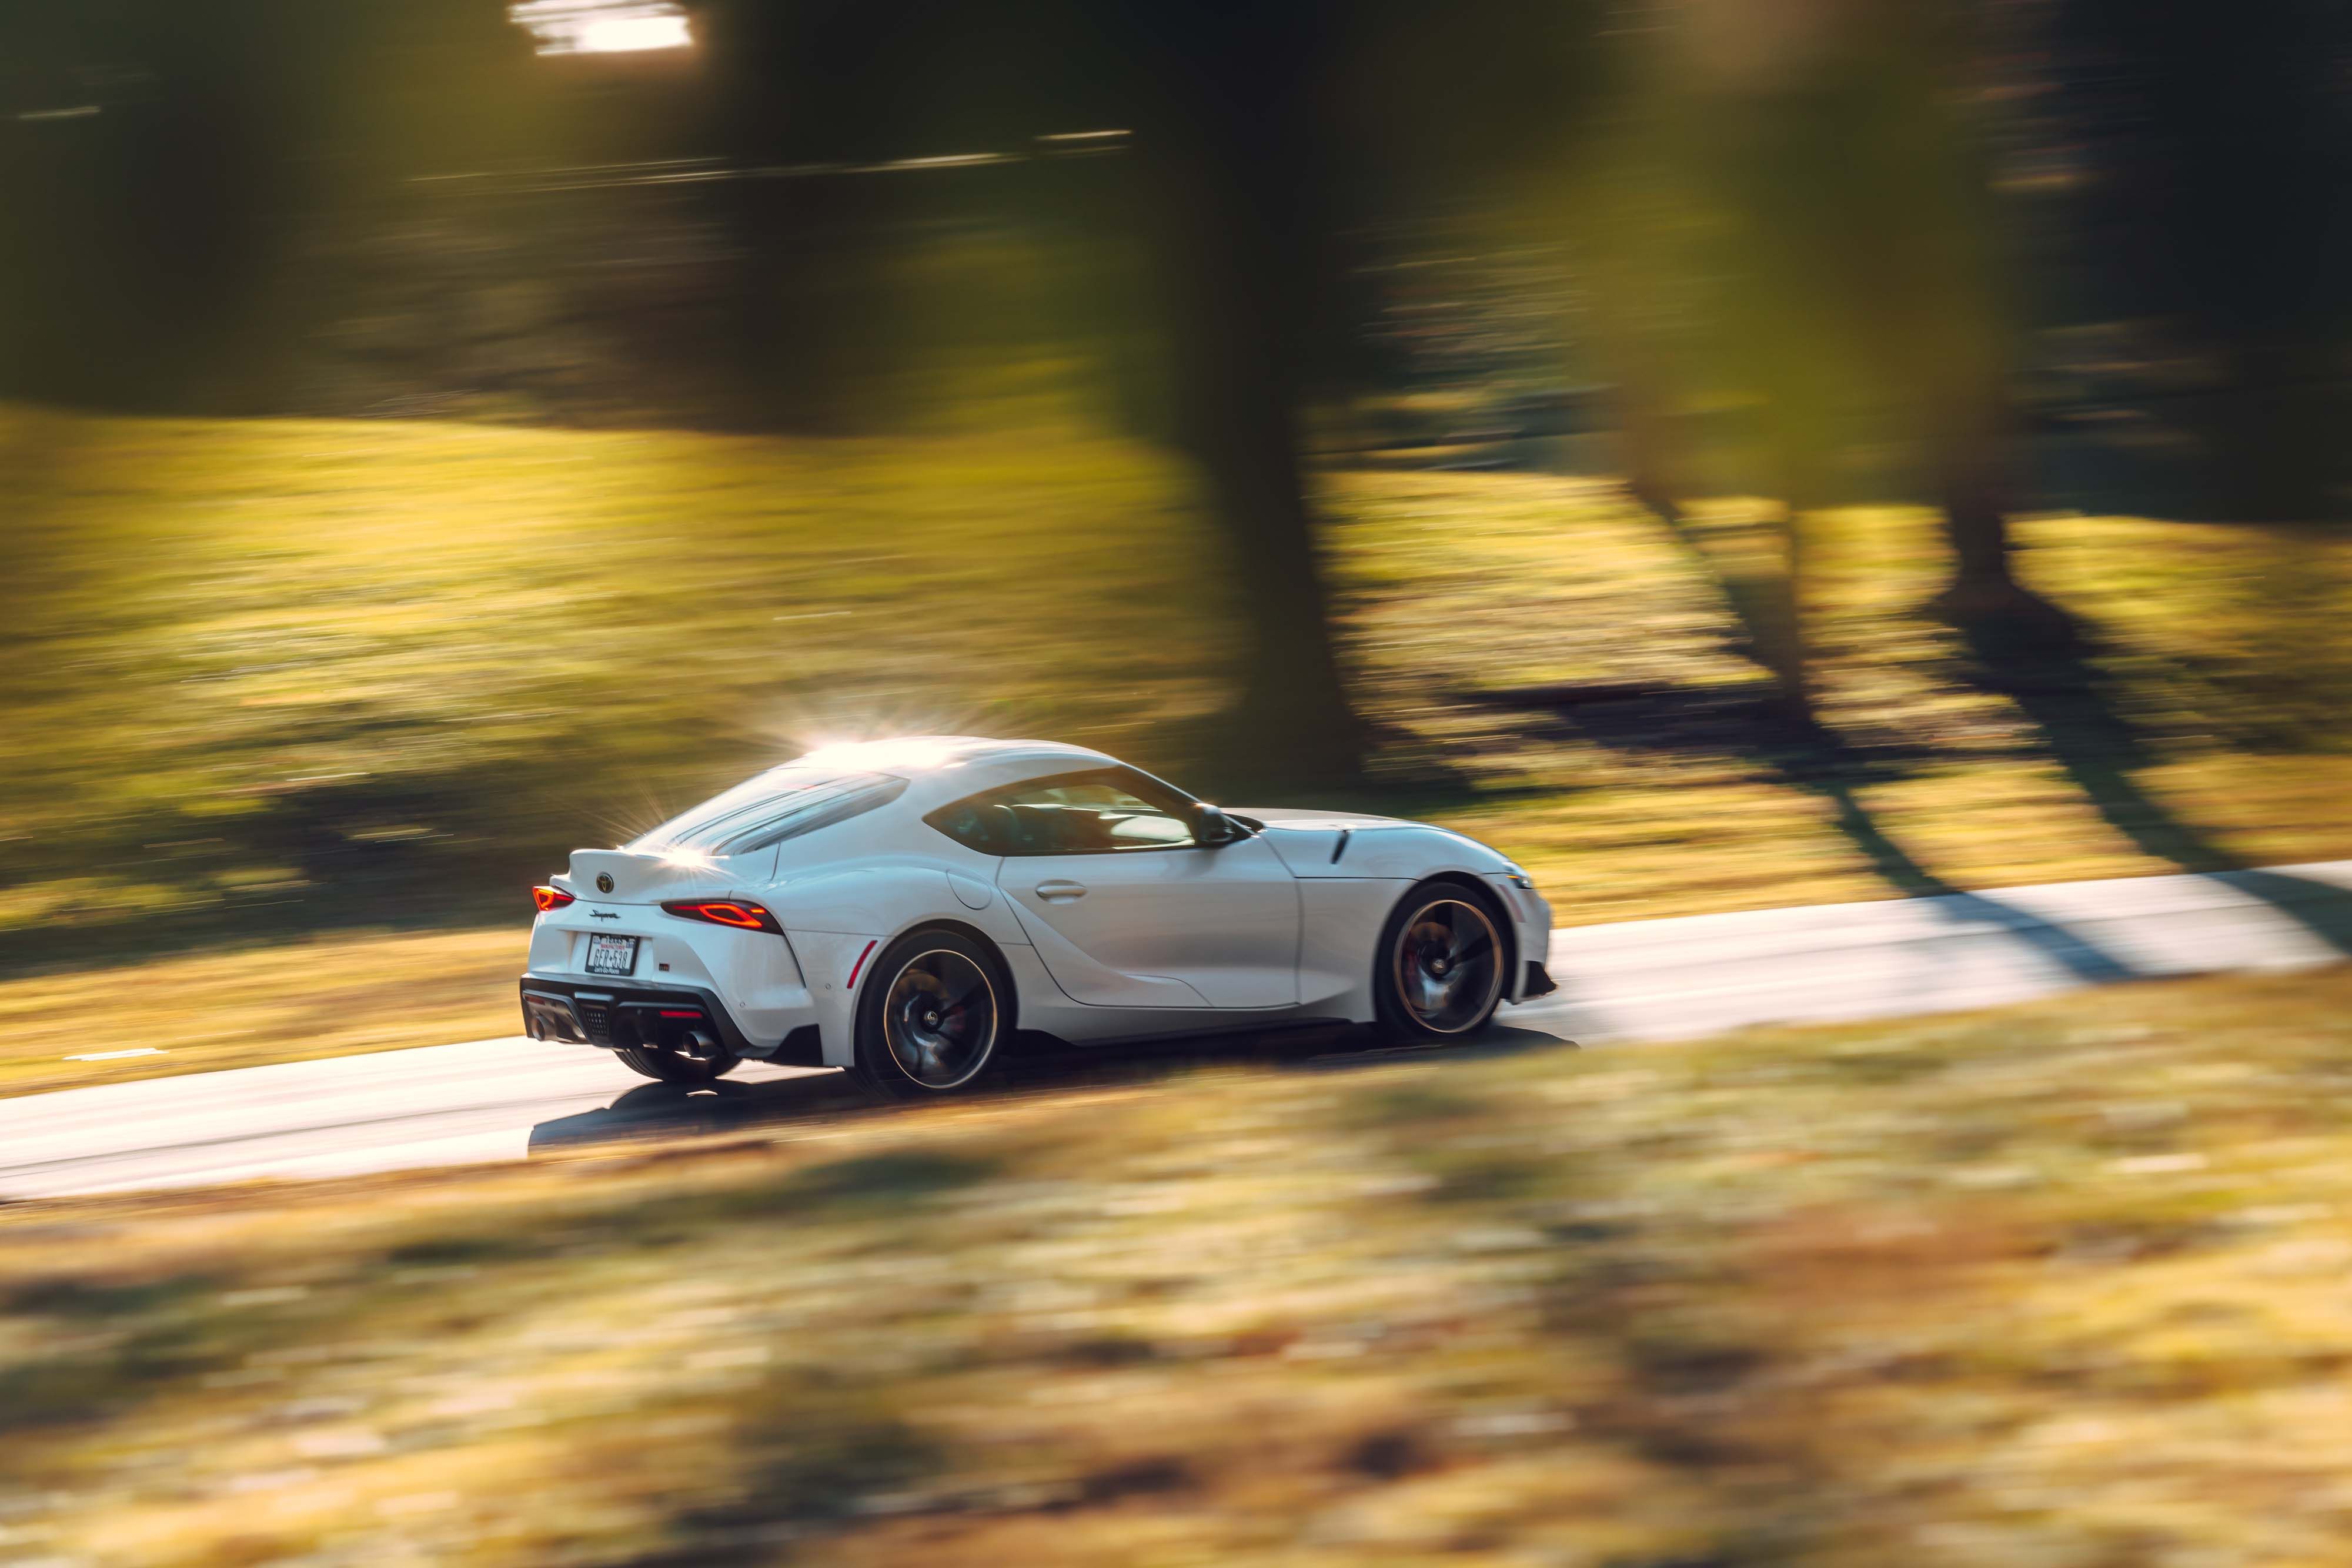 Toyota Supra Isn't the Japanese Sports Car I Wanted: Review